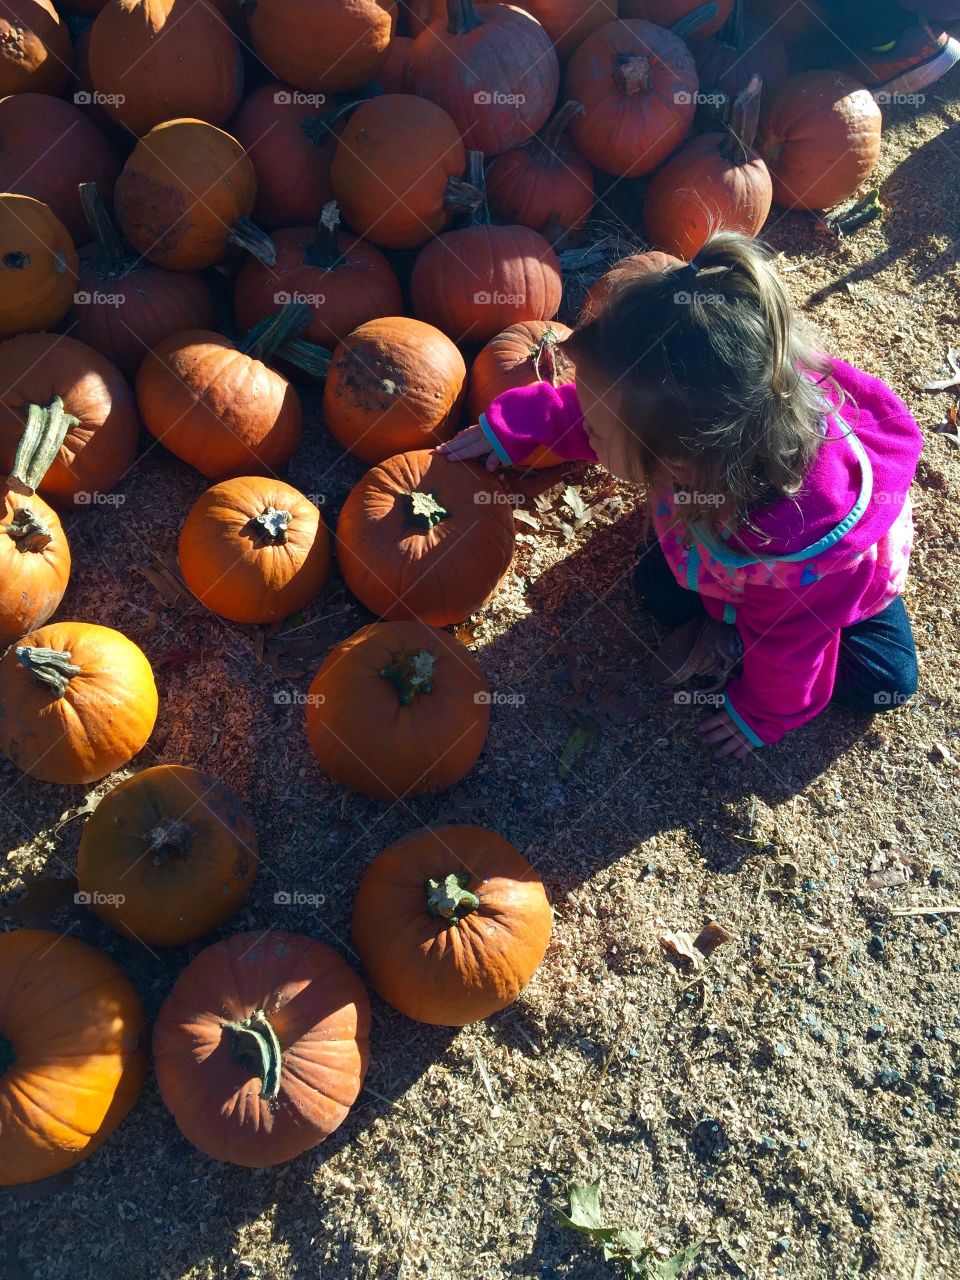 Picking the perfect pumpkin